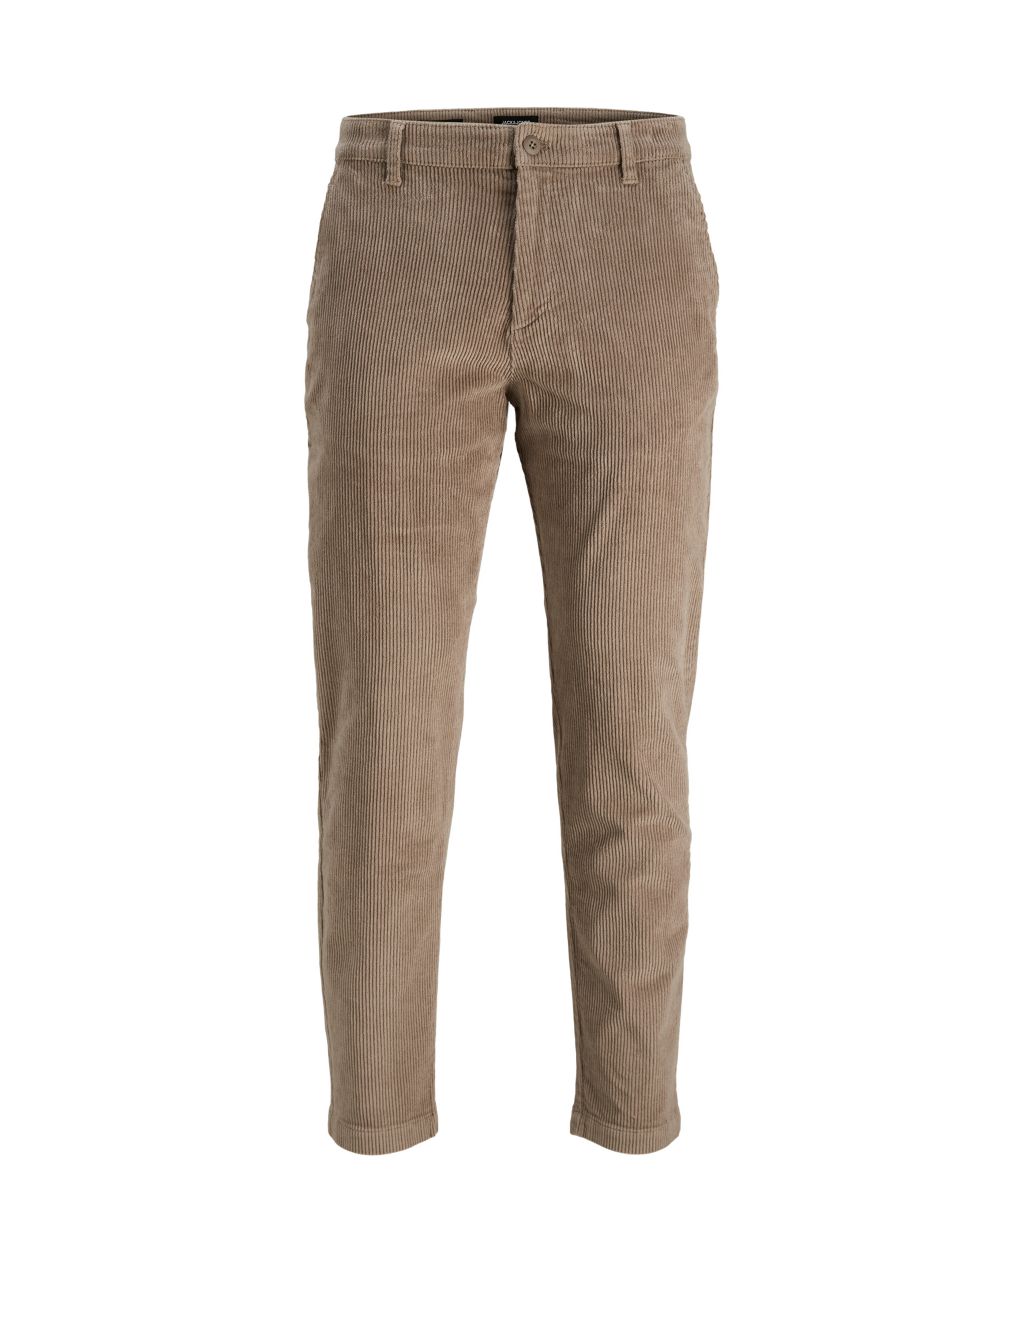 Tapered Fit Corduroy Chinos image 2